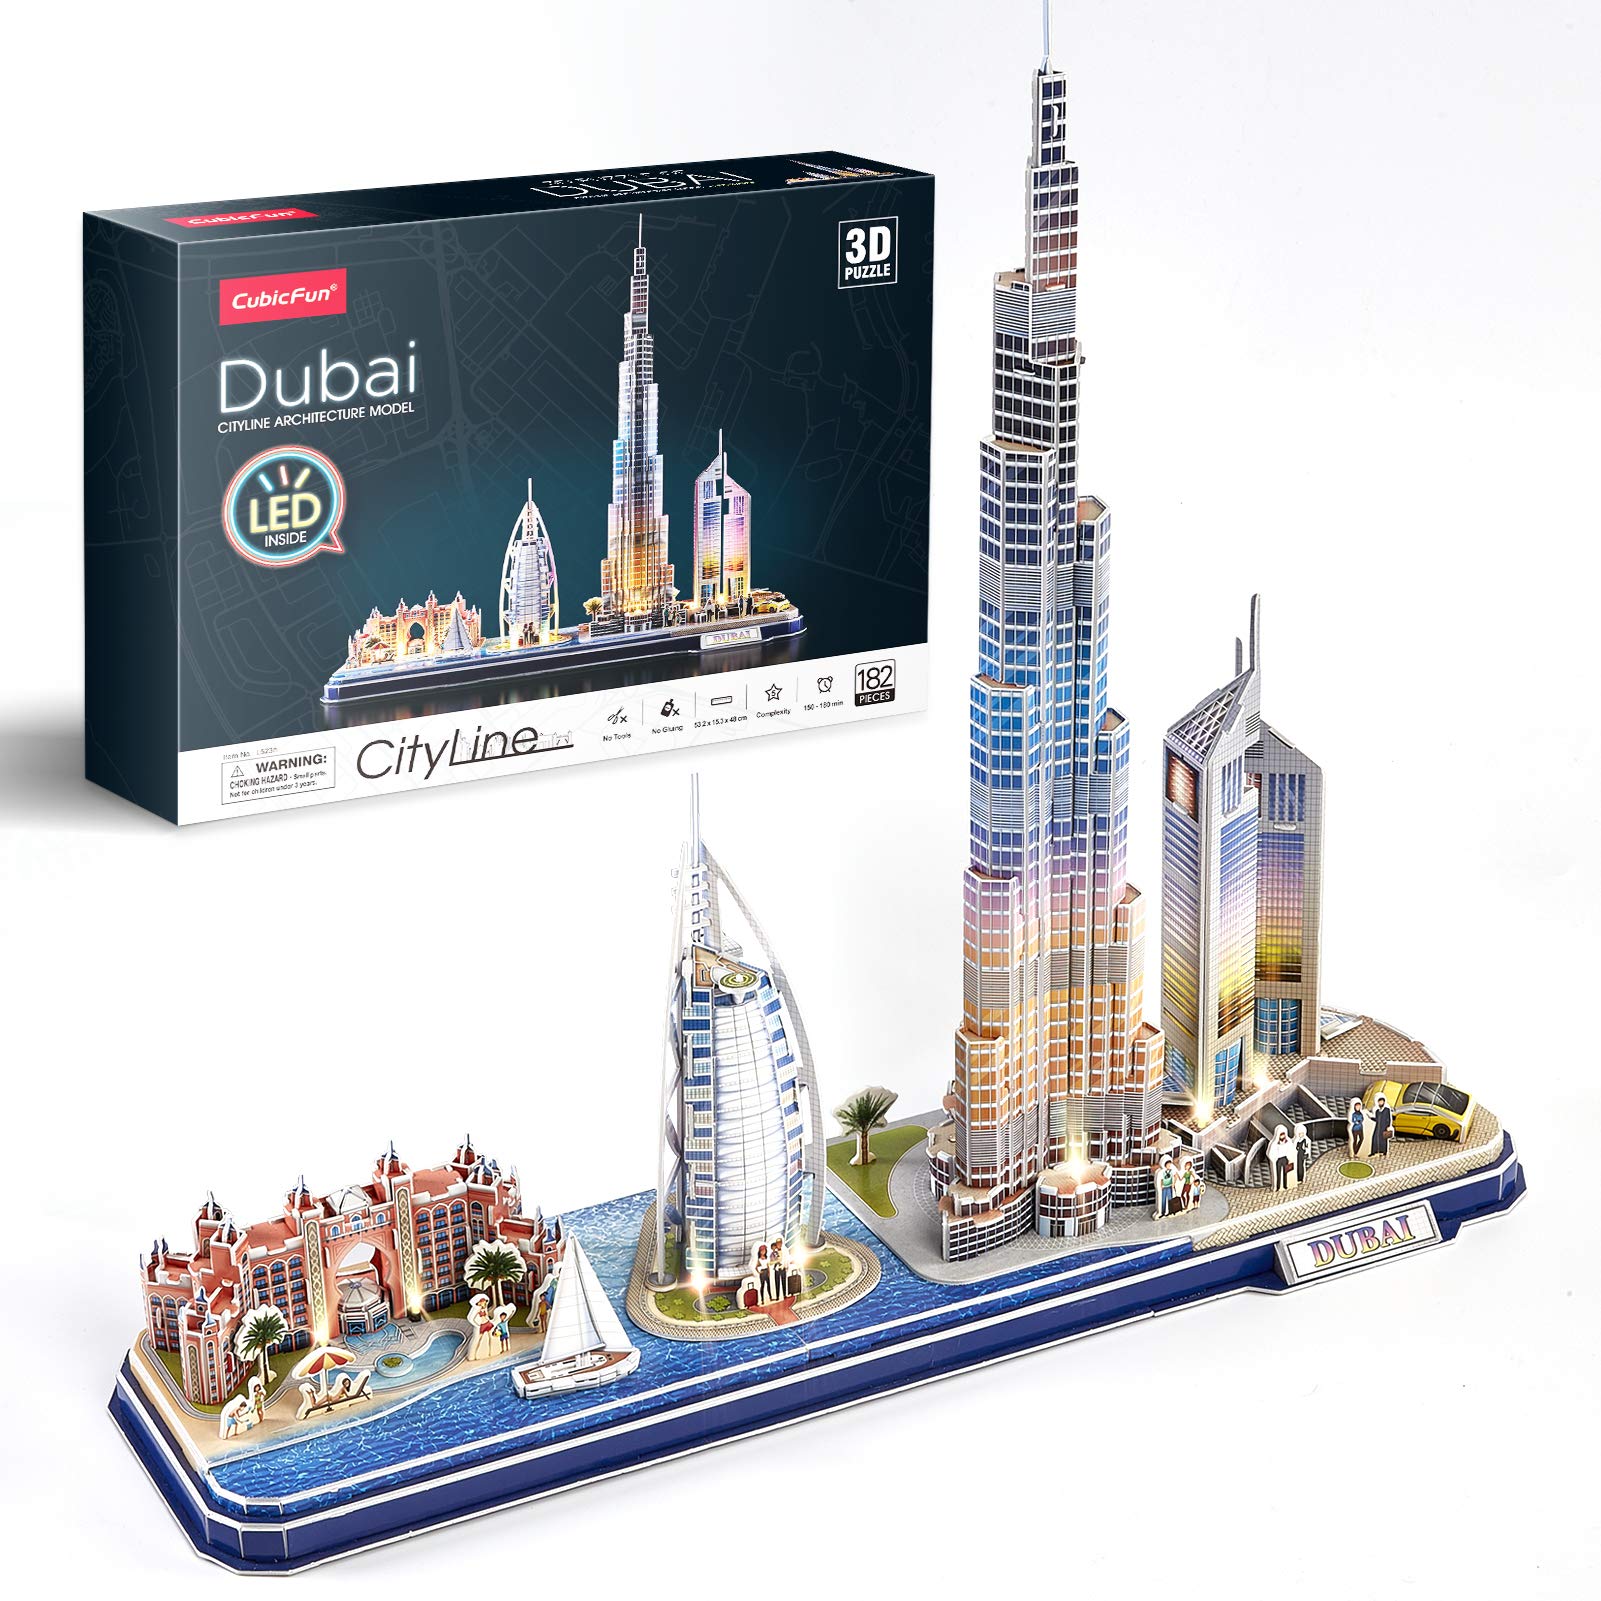 cubicFun 3D Puzzles for Kids Ages 8-10 LED Dubai cityline, Arts and crafts for Kids Ages 8-12 STEM Projects for Kids Ages 8-12 g